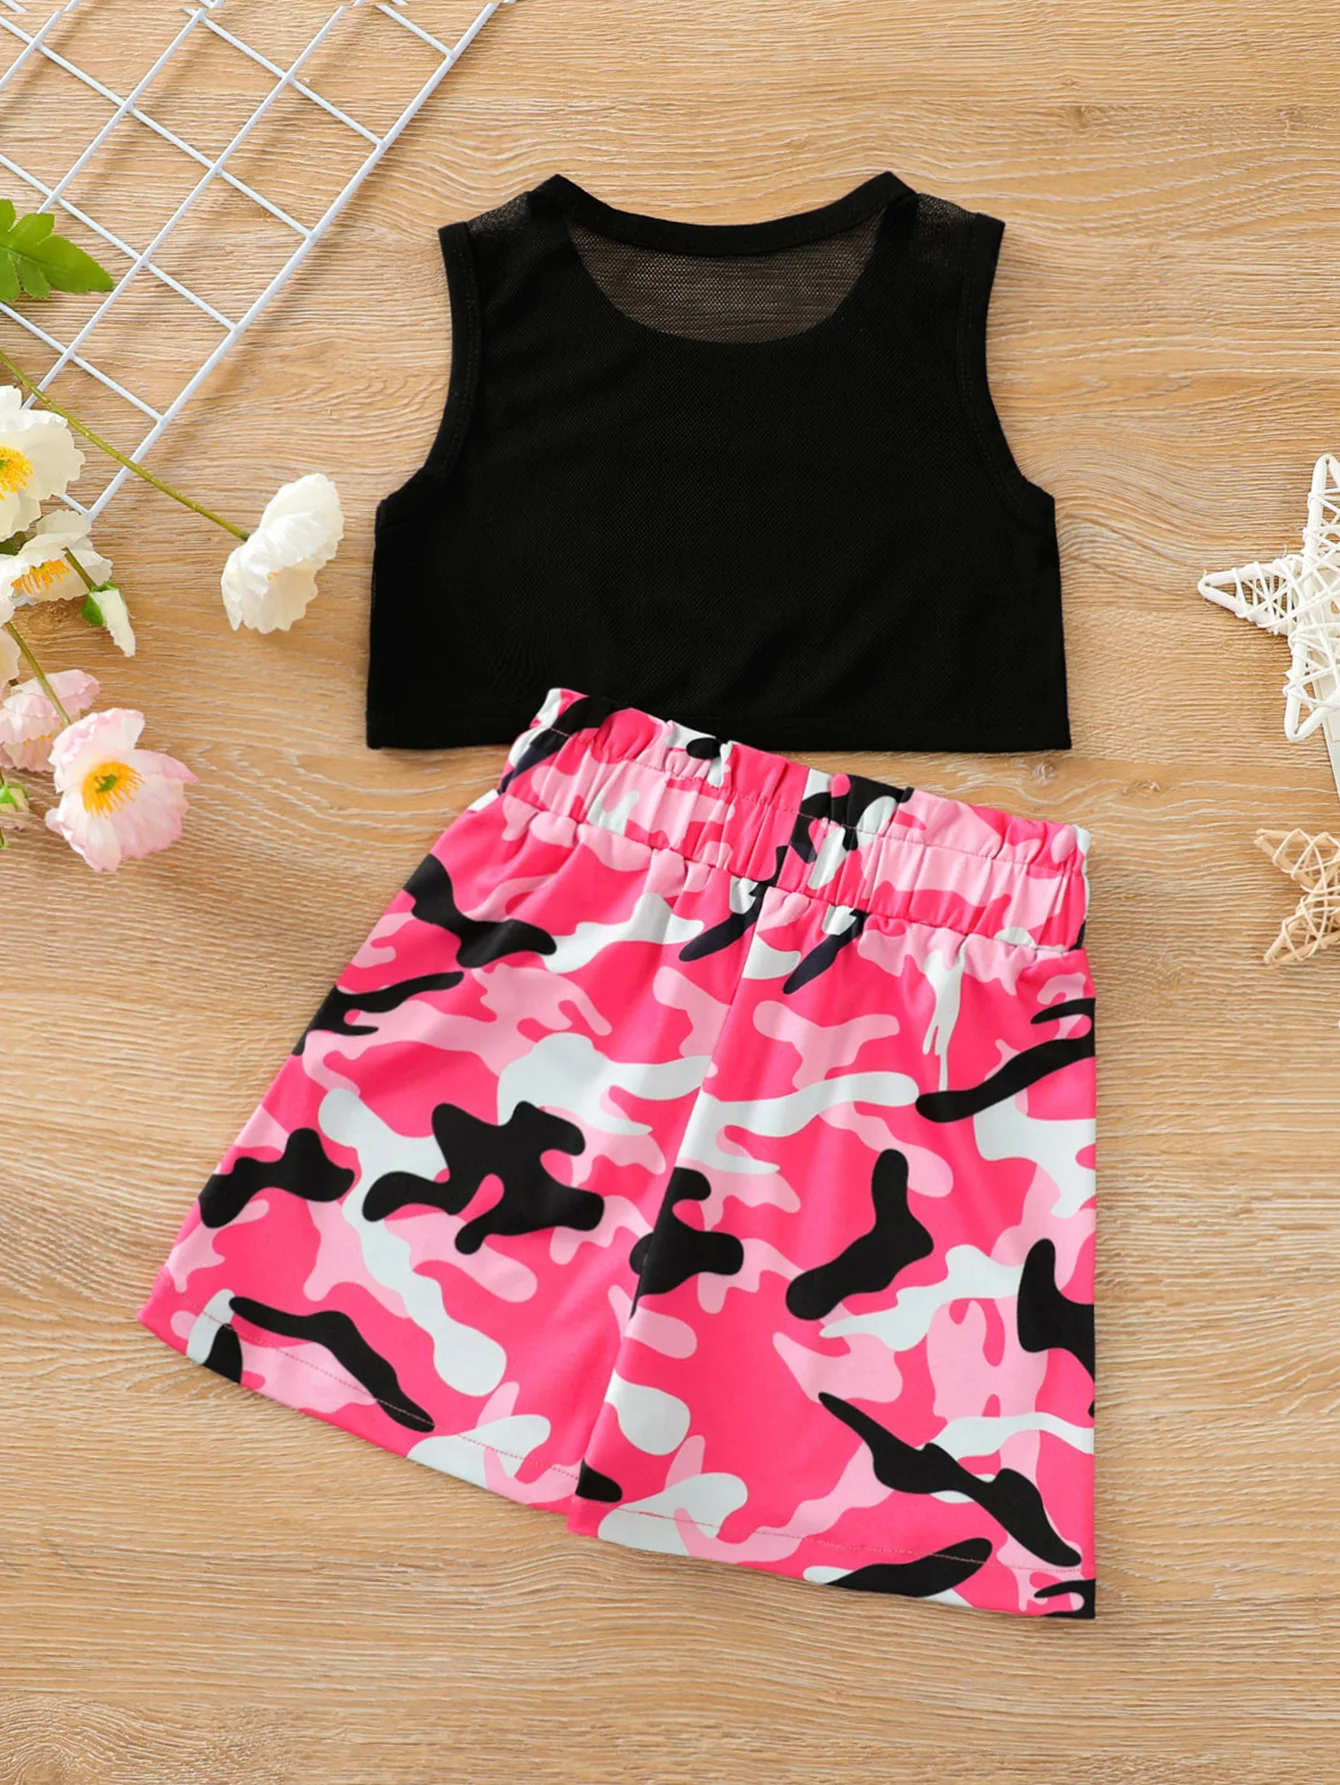 New arrival fashion toddler girls clothing sets sleeveless tops matching camouflage shorts two piece clothes for kids